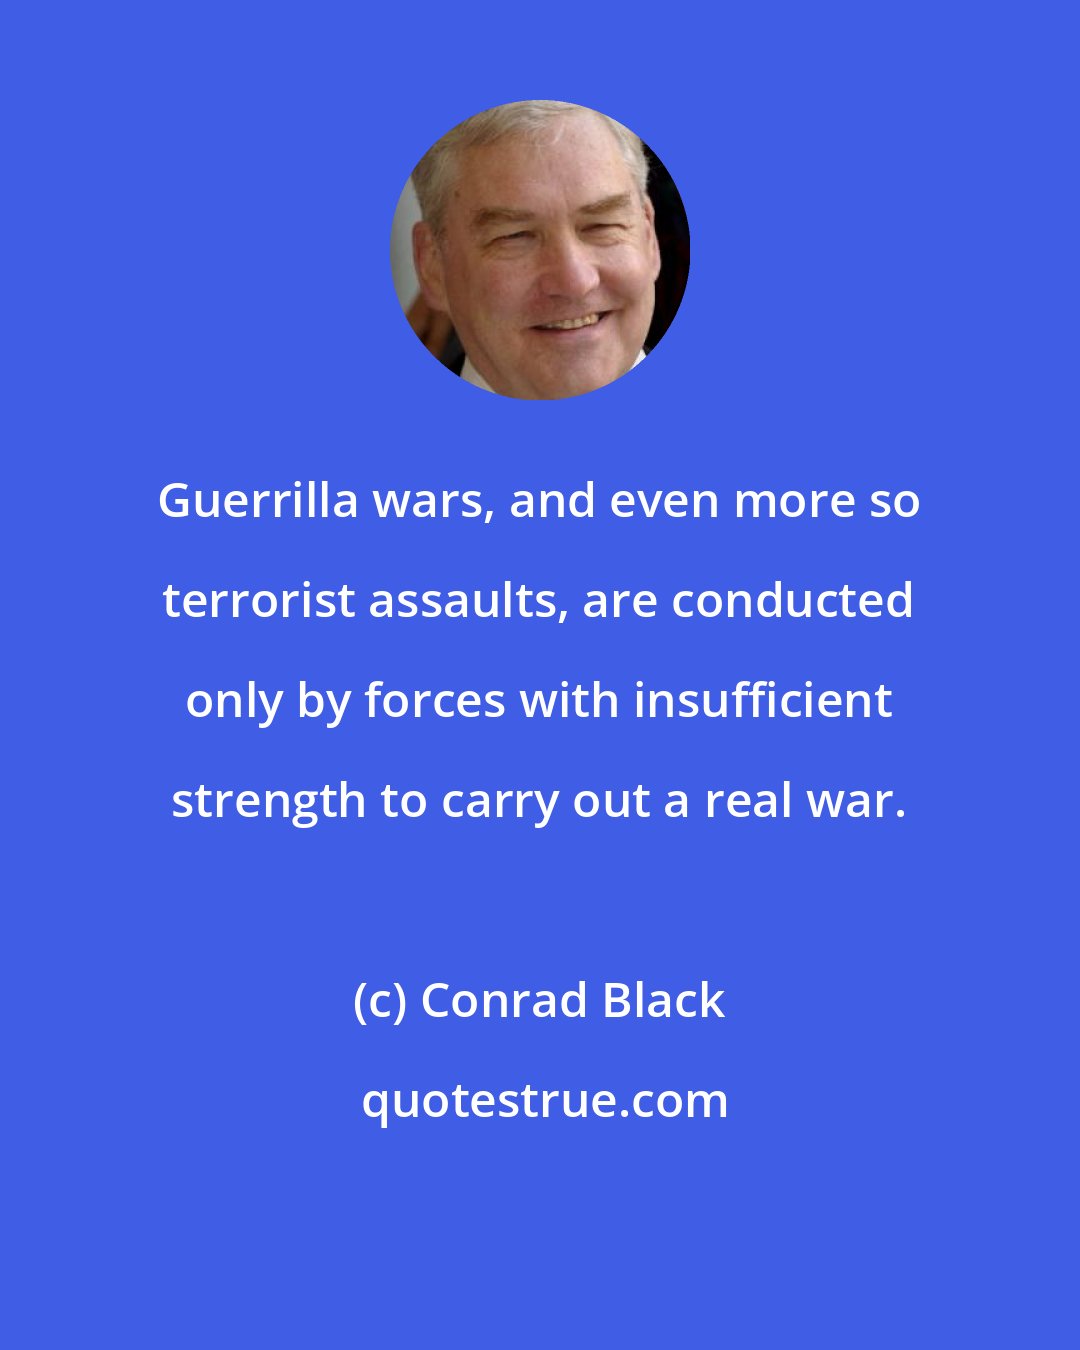 Conrad Black: Guerrilla wars, and even more so terrorist assaults, are conducted only by forces with insufficient strength to carry out a real war.